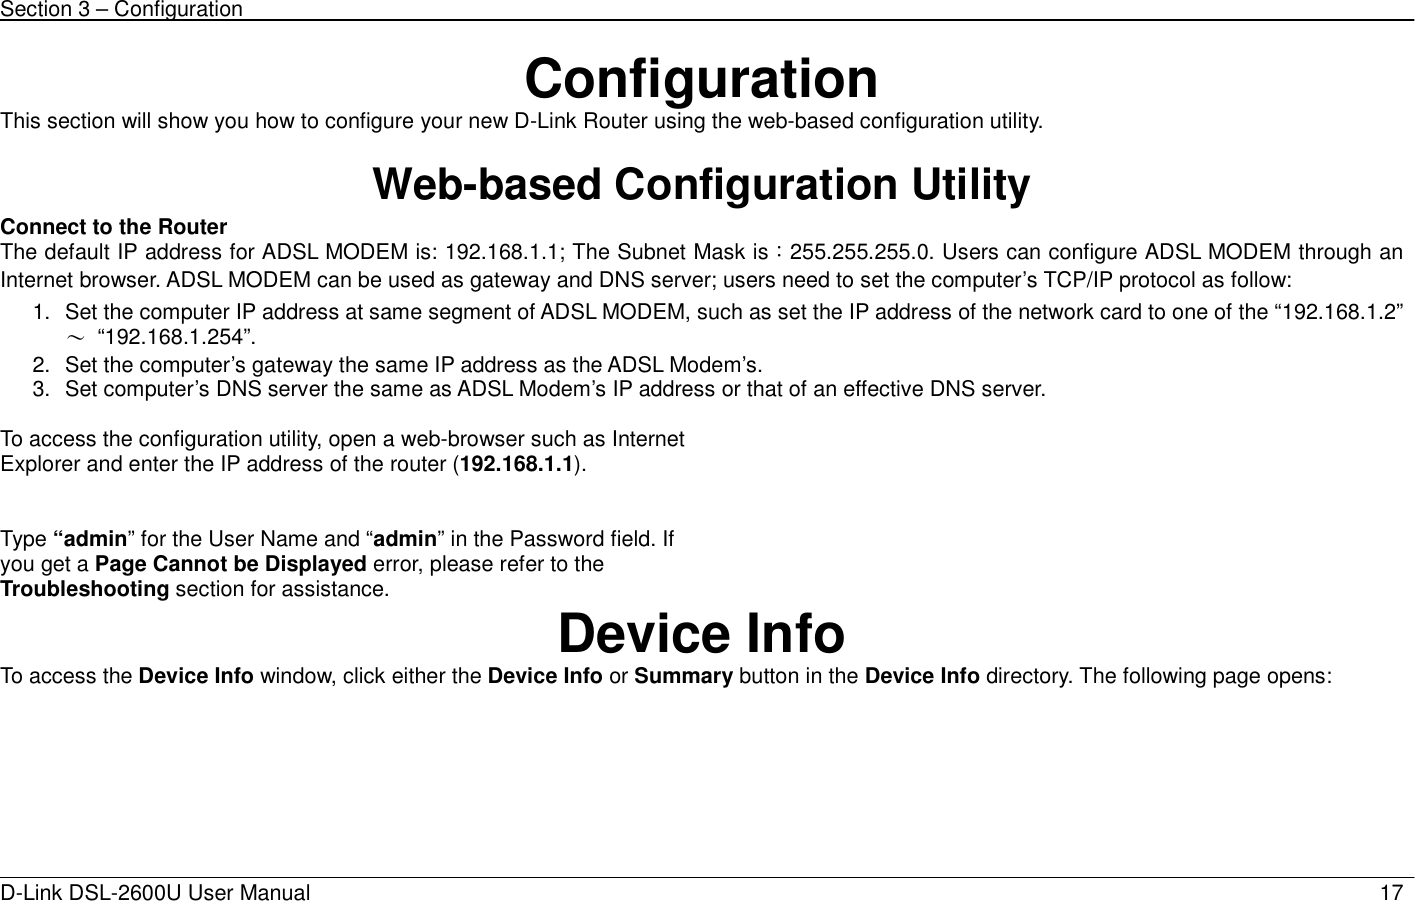 Section 3 – Configuration   D-Link DSL-2600U User Manual                            17Configuration This section will show you how to configure your new D-Link Router using the web-based configuration utility.  Web-based Configuration Utility Connect to the Router   The default IP address for ADSL MODEM is: 192.168.1.1; The Subnet Mask is：255.255.255.0. Users can configure ADSL MODEM through an Internet browser. ADSL MODEM can be used as gateway and DNS server; users need to set the computer’s TCP/IP protocol as follow: 1.  Set the computer IP address at same segment of ADSL MODEM, such as set the IP address of the network card to one of the “192.168.1.2”∼ “192.168.1.254”. 2.  Set the computer’s gateway the same IP address as the ADSL Modem’s. 3.  Set computer’s DNS server the same as ADSL Modem’s IP address or that of an effective DNS server.  To access the configuration utility, open a web-browser such as Internet Explorer and enter the IP address of the router (192.168.1.1).      Type “admin” for the User Name and “admin” in the Password field. If you get a Page Cannot be Displayed error, please refer to the Troubleshooting section for assistance.  Device Info To access the Device Info window, click either the Device Info or Summary button in the Device Info directory. The following page opens:  